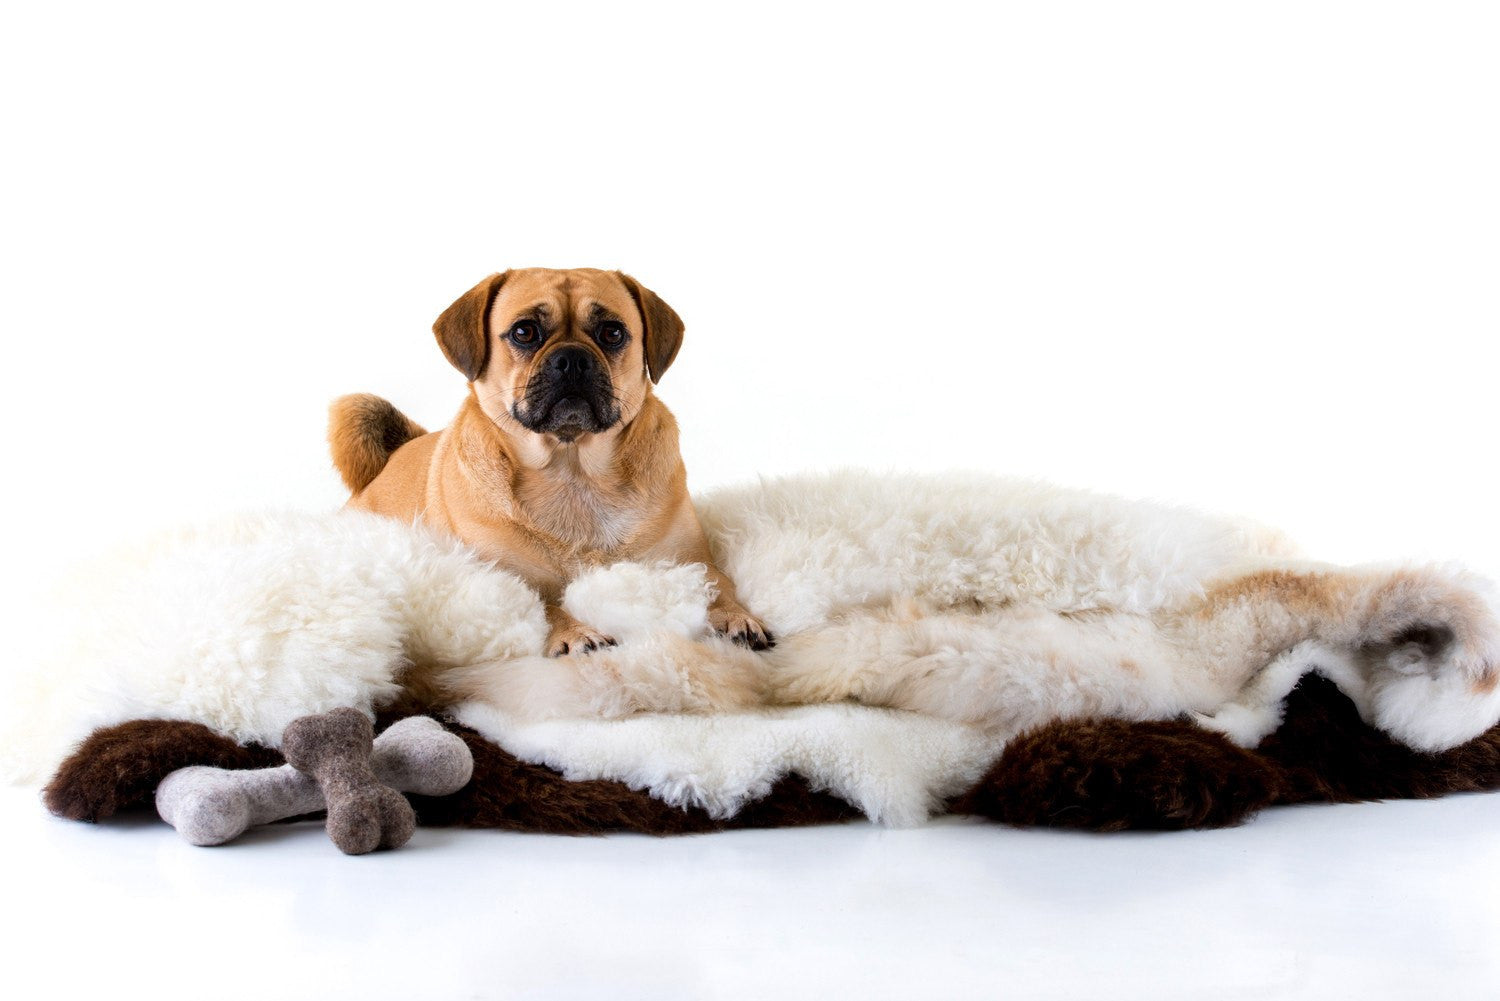 Pug on top of a selection of British luxury sheepskins.